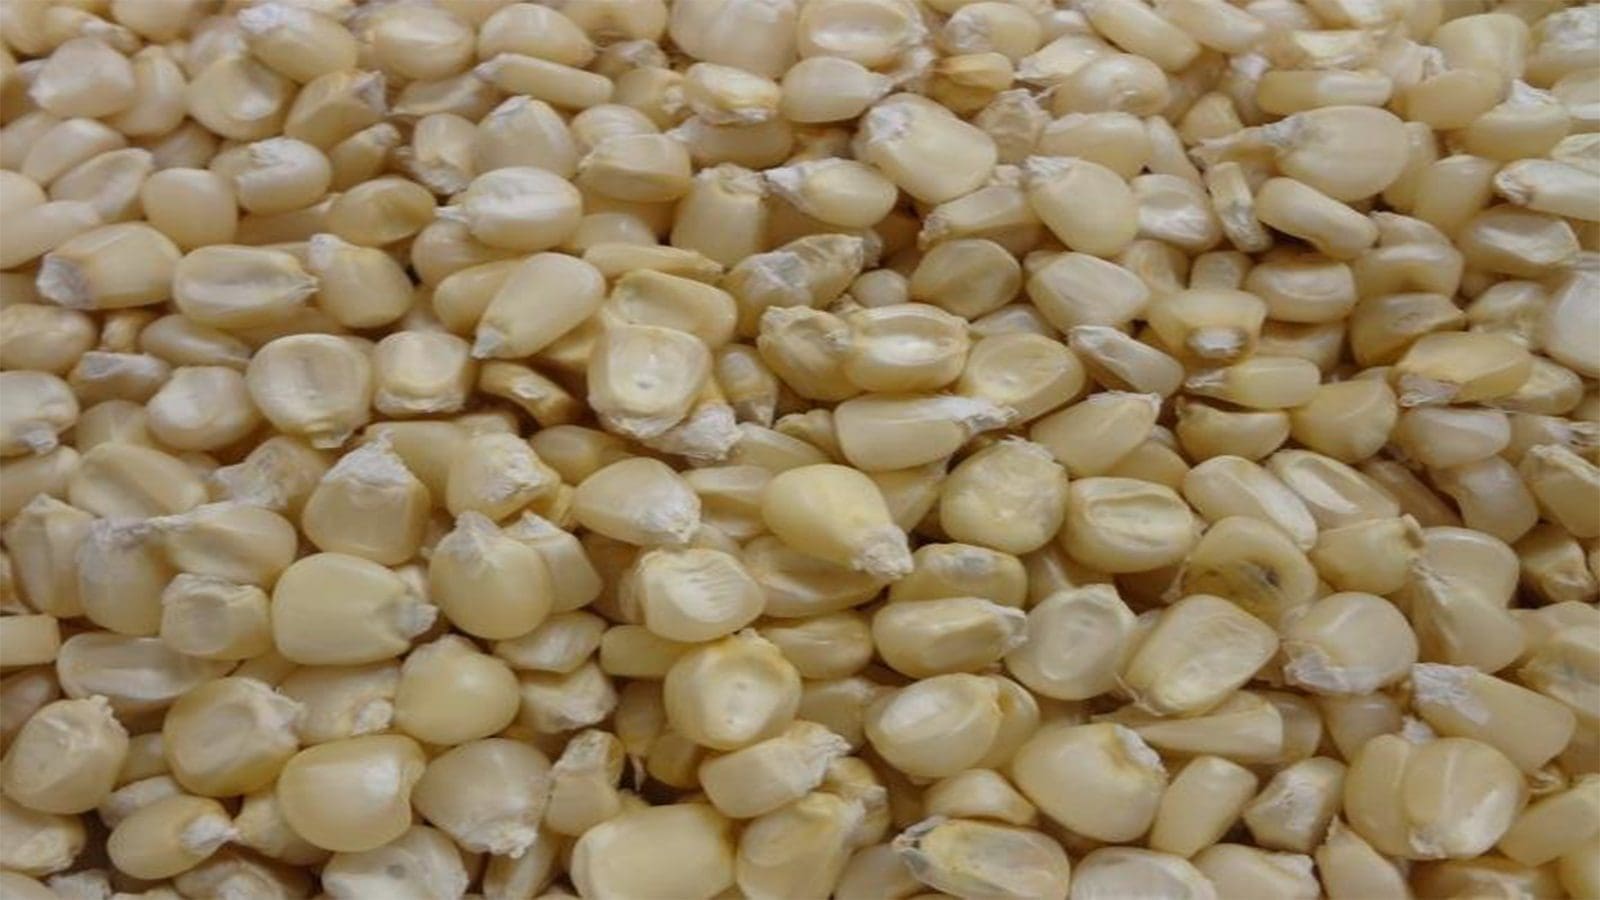 Zambia bans maize export to protect local supply amid drought